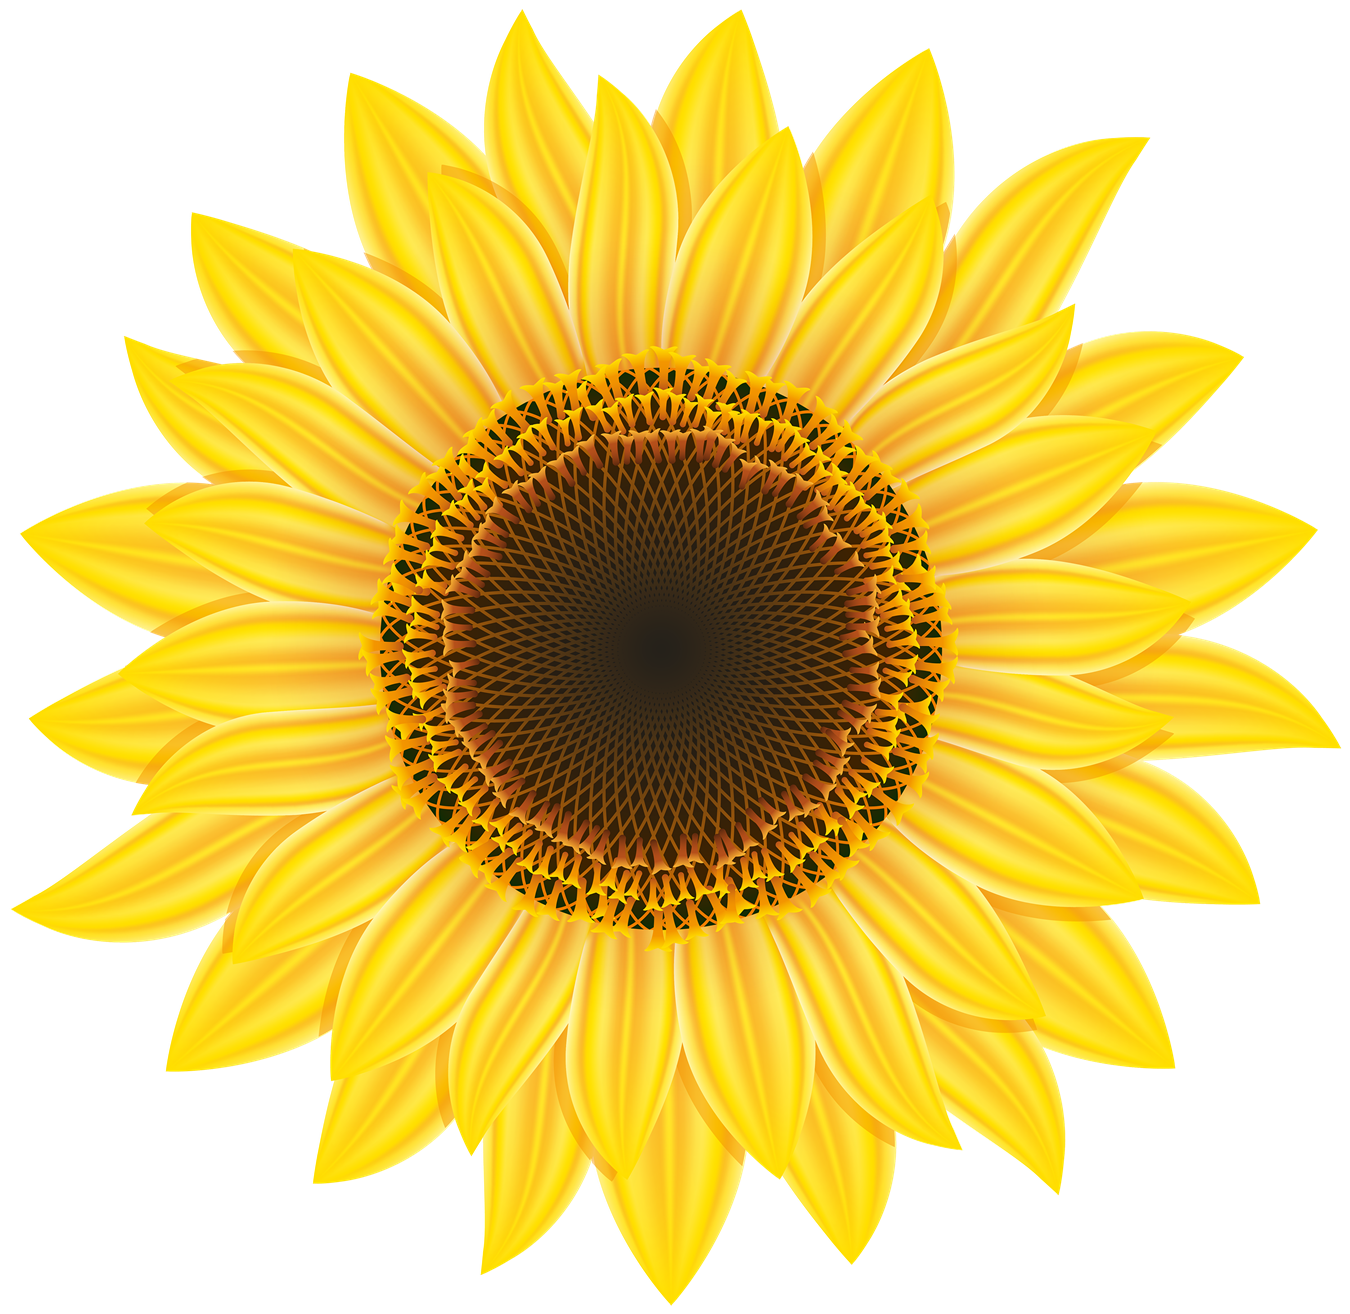 Sunflower Image PNG Image